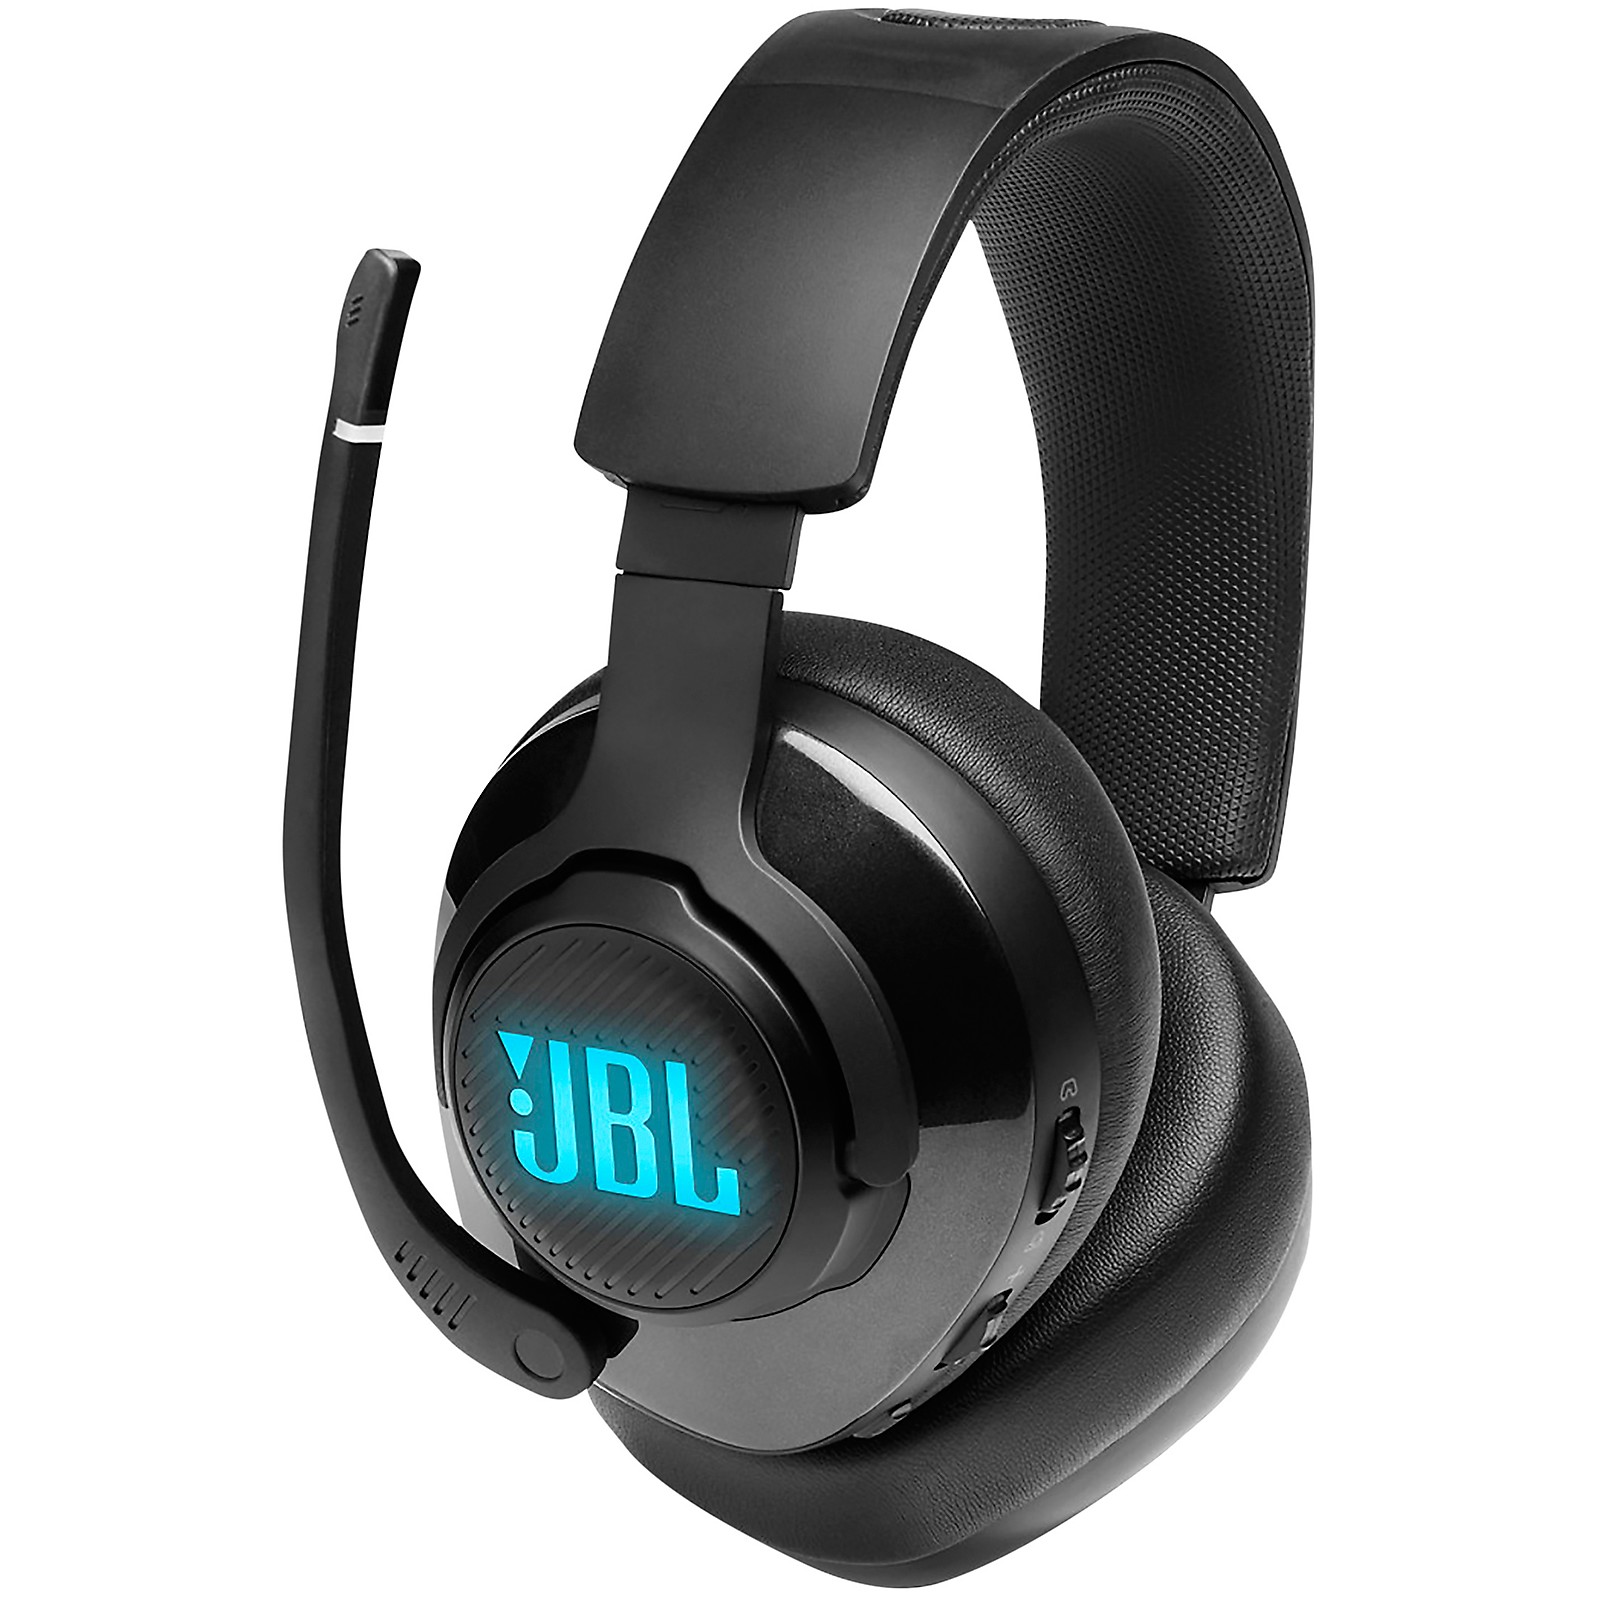 Surround Yourself With Sound With the JBL Quantum 400 USB Gaming Headset -  GeekDad